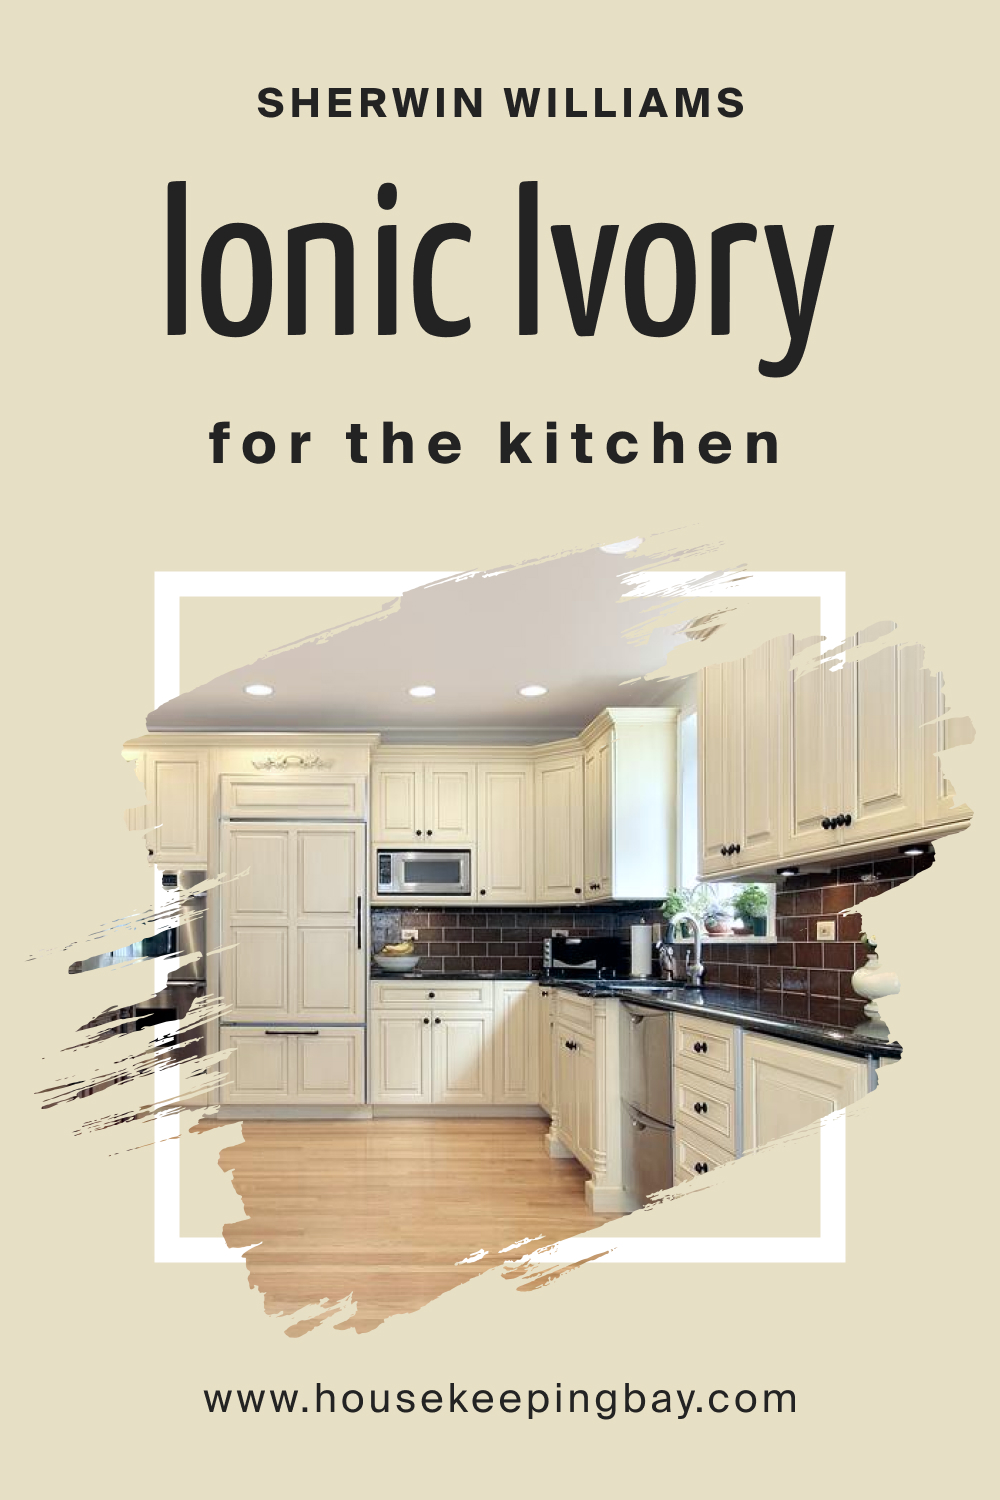 Sherwin Williams. SW 6406 Ionic Ivory For the Kitchens